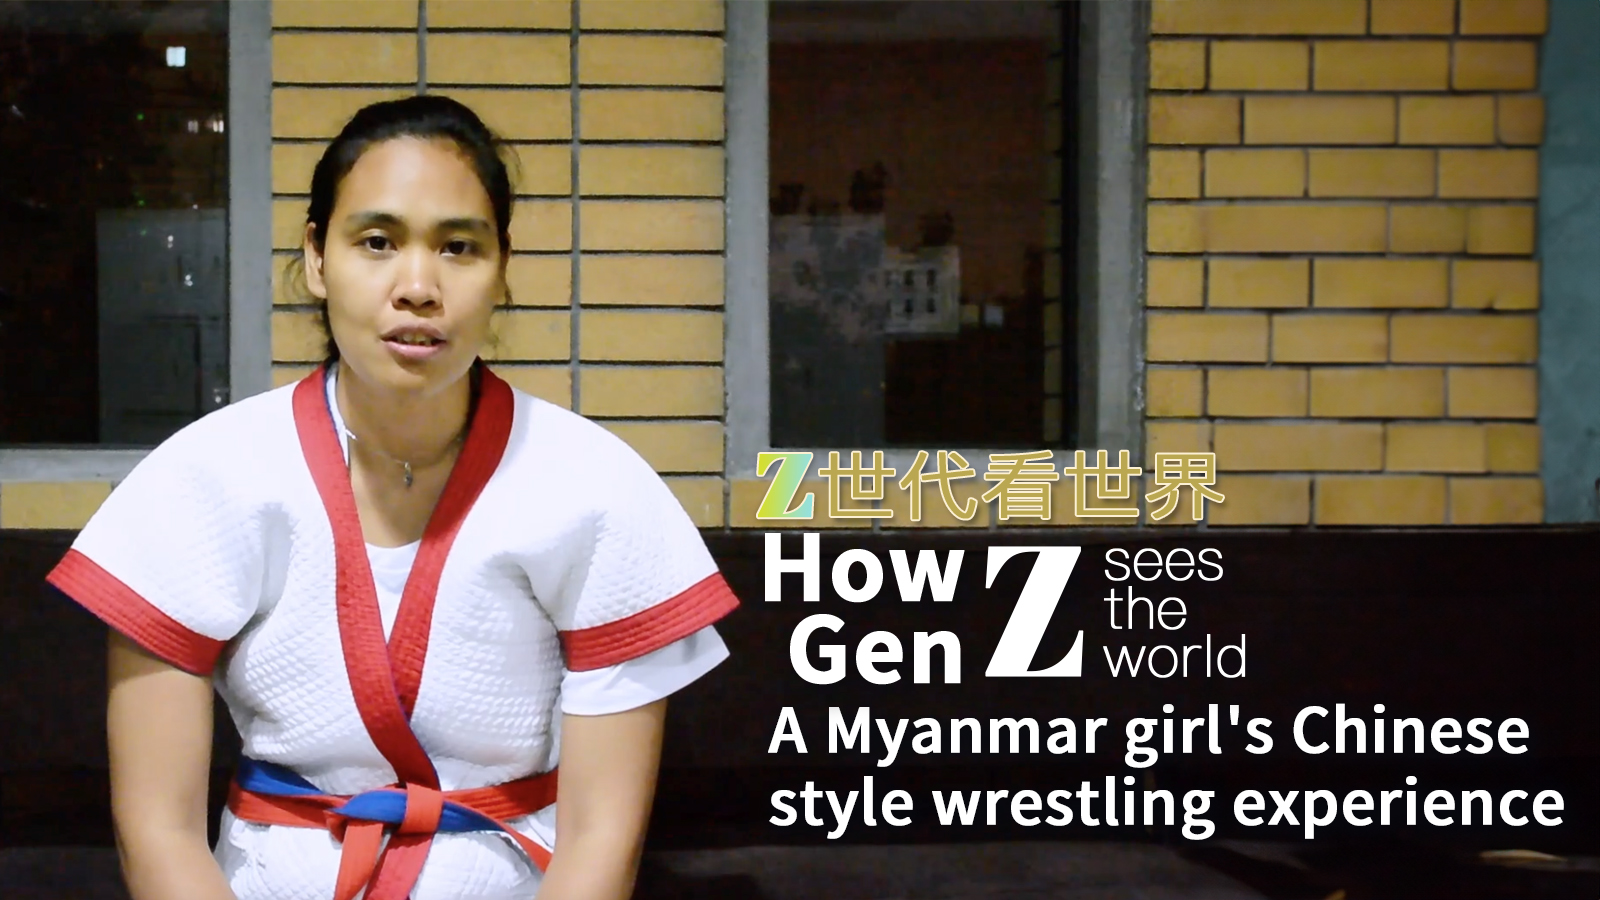 A Myanmar girl's Chinese style wrestling experience